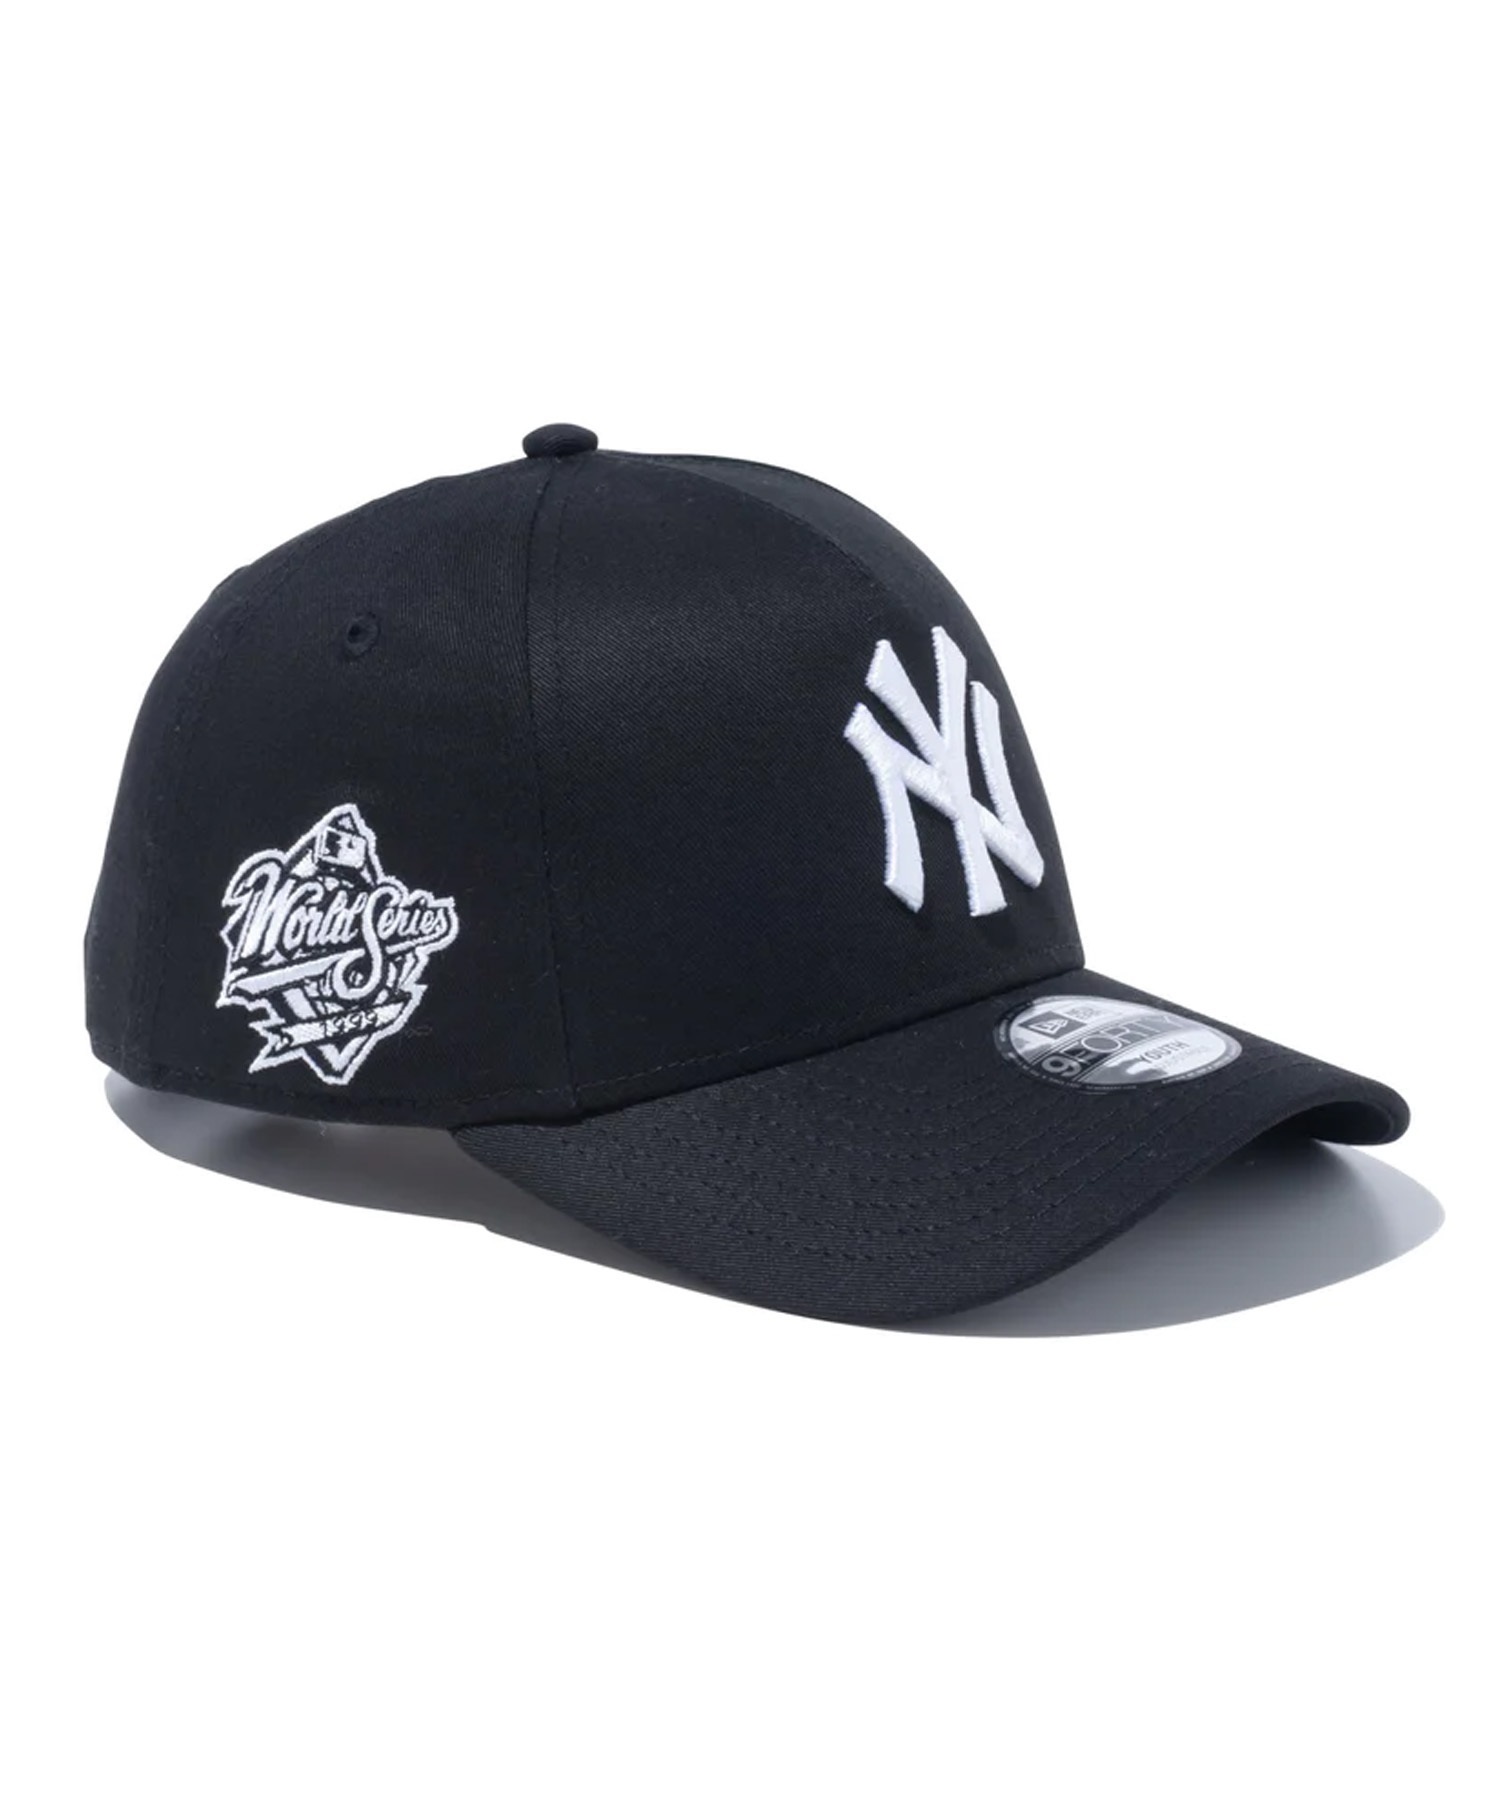 NEW ERA ニューエラ Youth 9FORTY A-Frame MLB ニューヨーク・ヤンキース キッズ キャップ 940AF 13762787(BKWH-YTH)